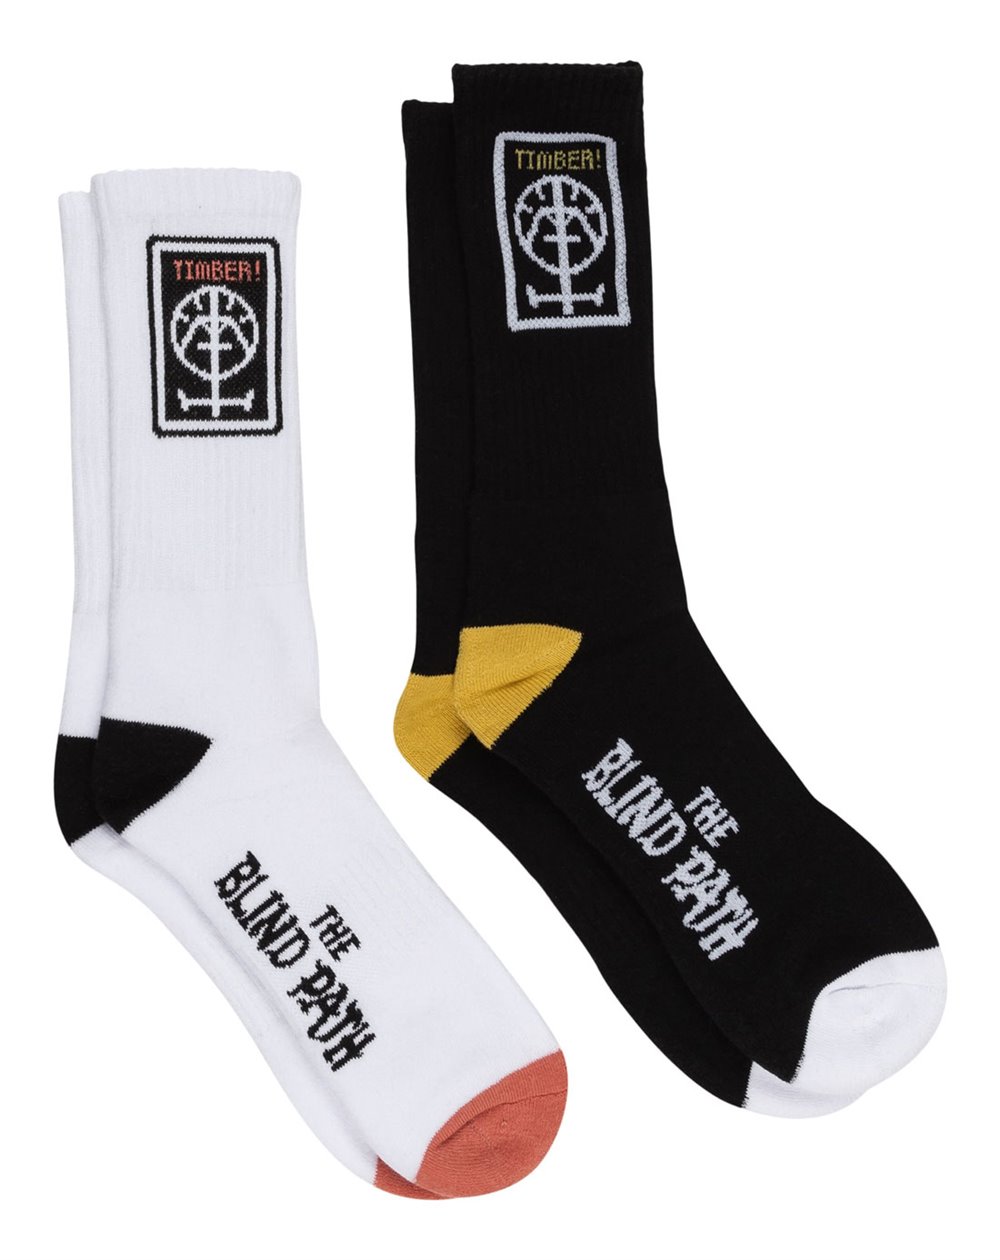 Element Chaussettes Skate Timber 2 pc